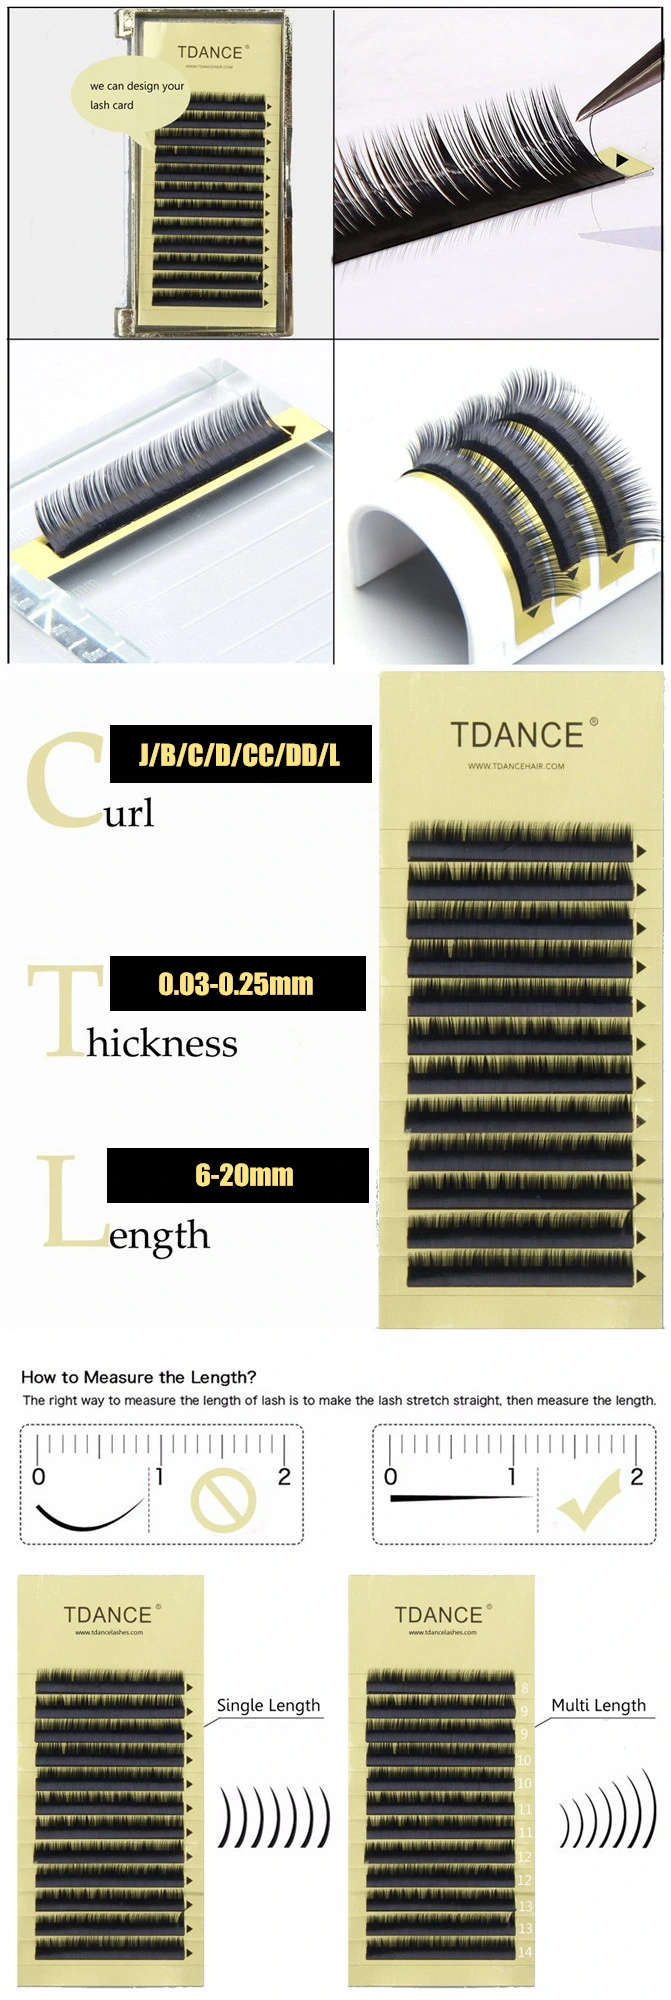 Tdance Best Price Inidividual Eyelash Extension Real Silk Lashes